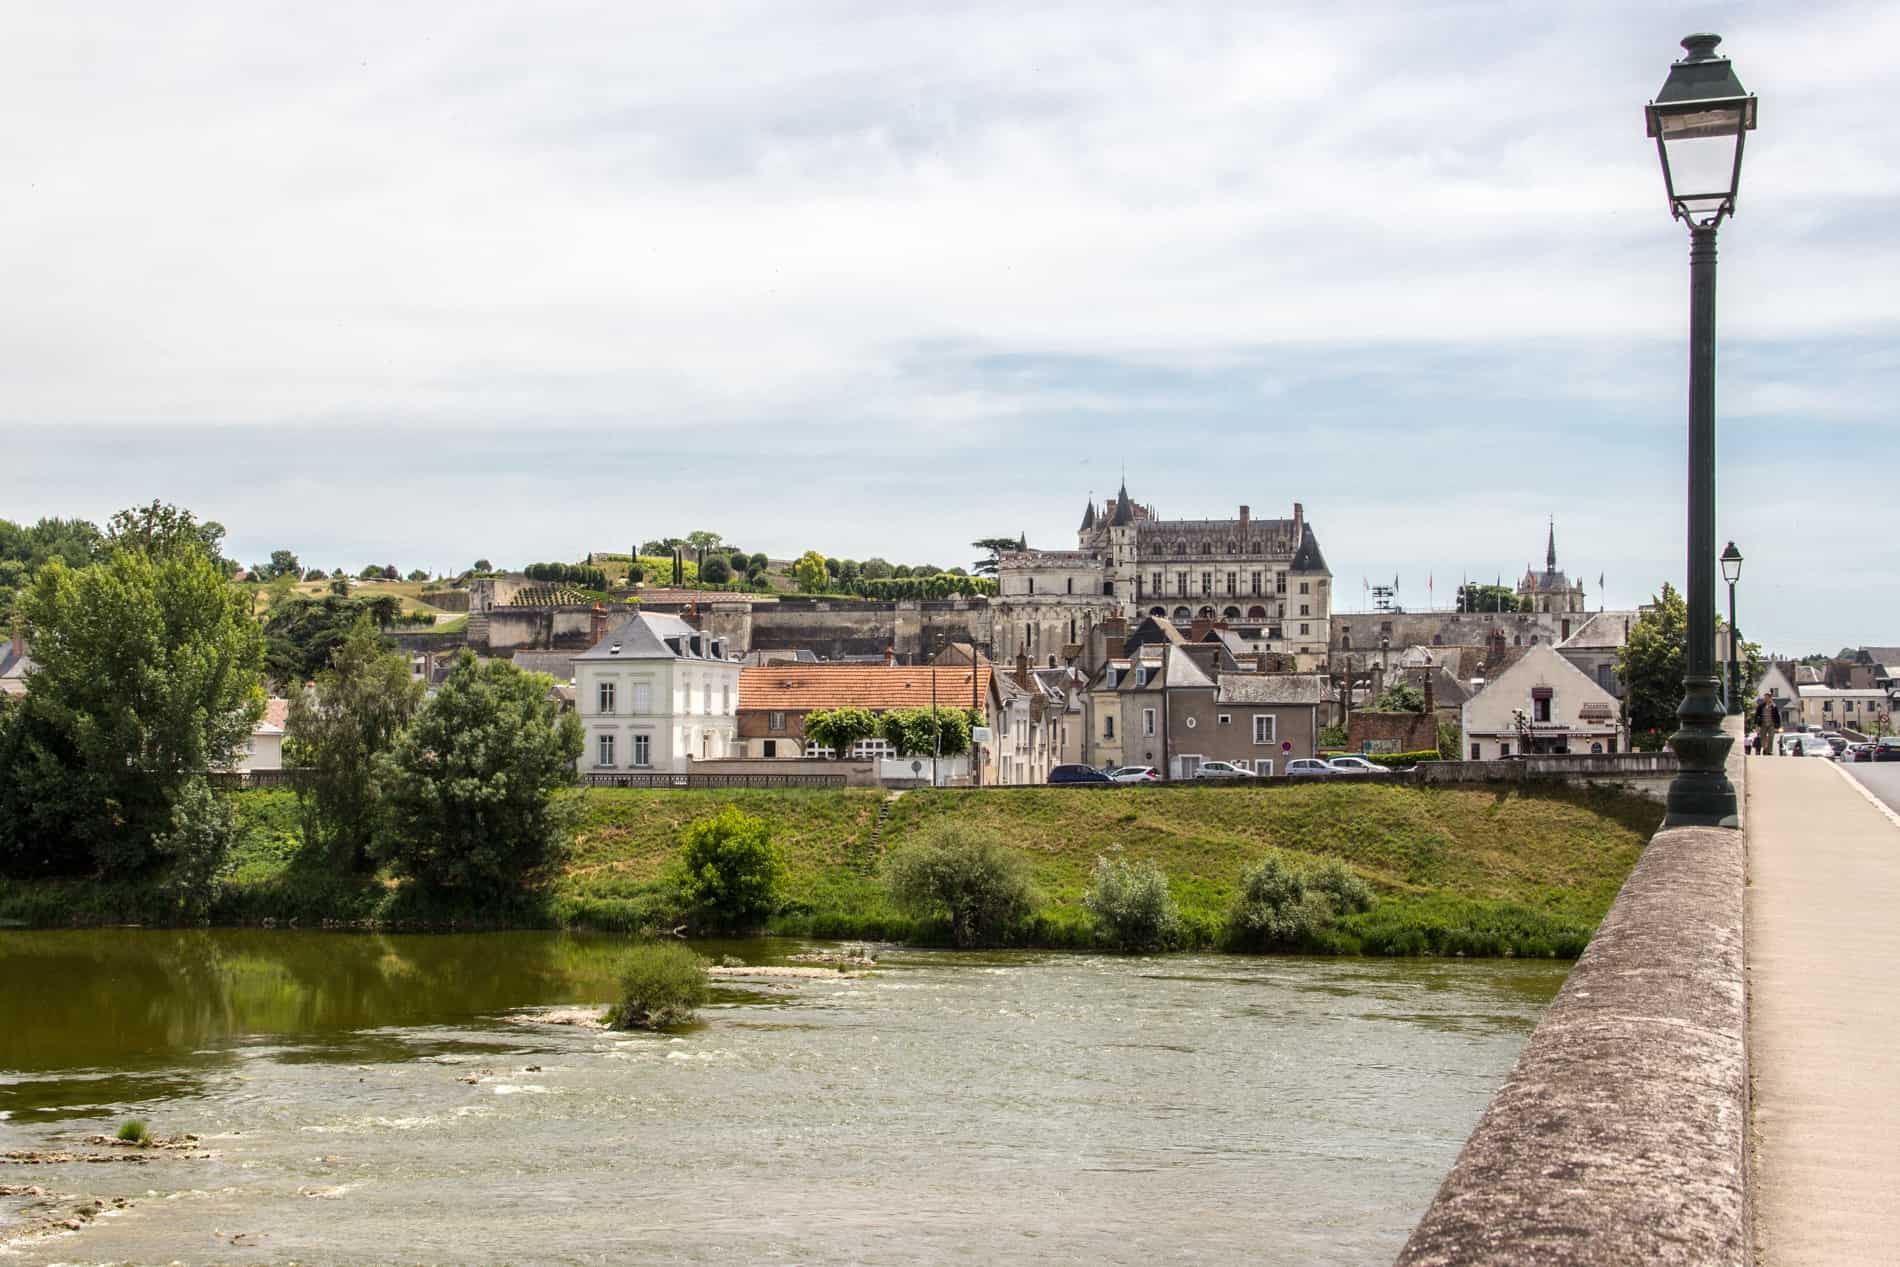 View from the bridge over the wide River Loire approaching the old town of Amboise.